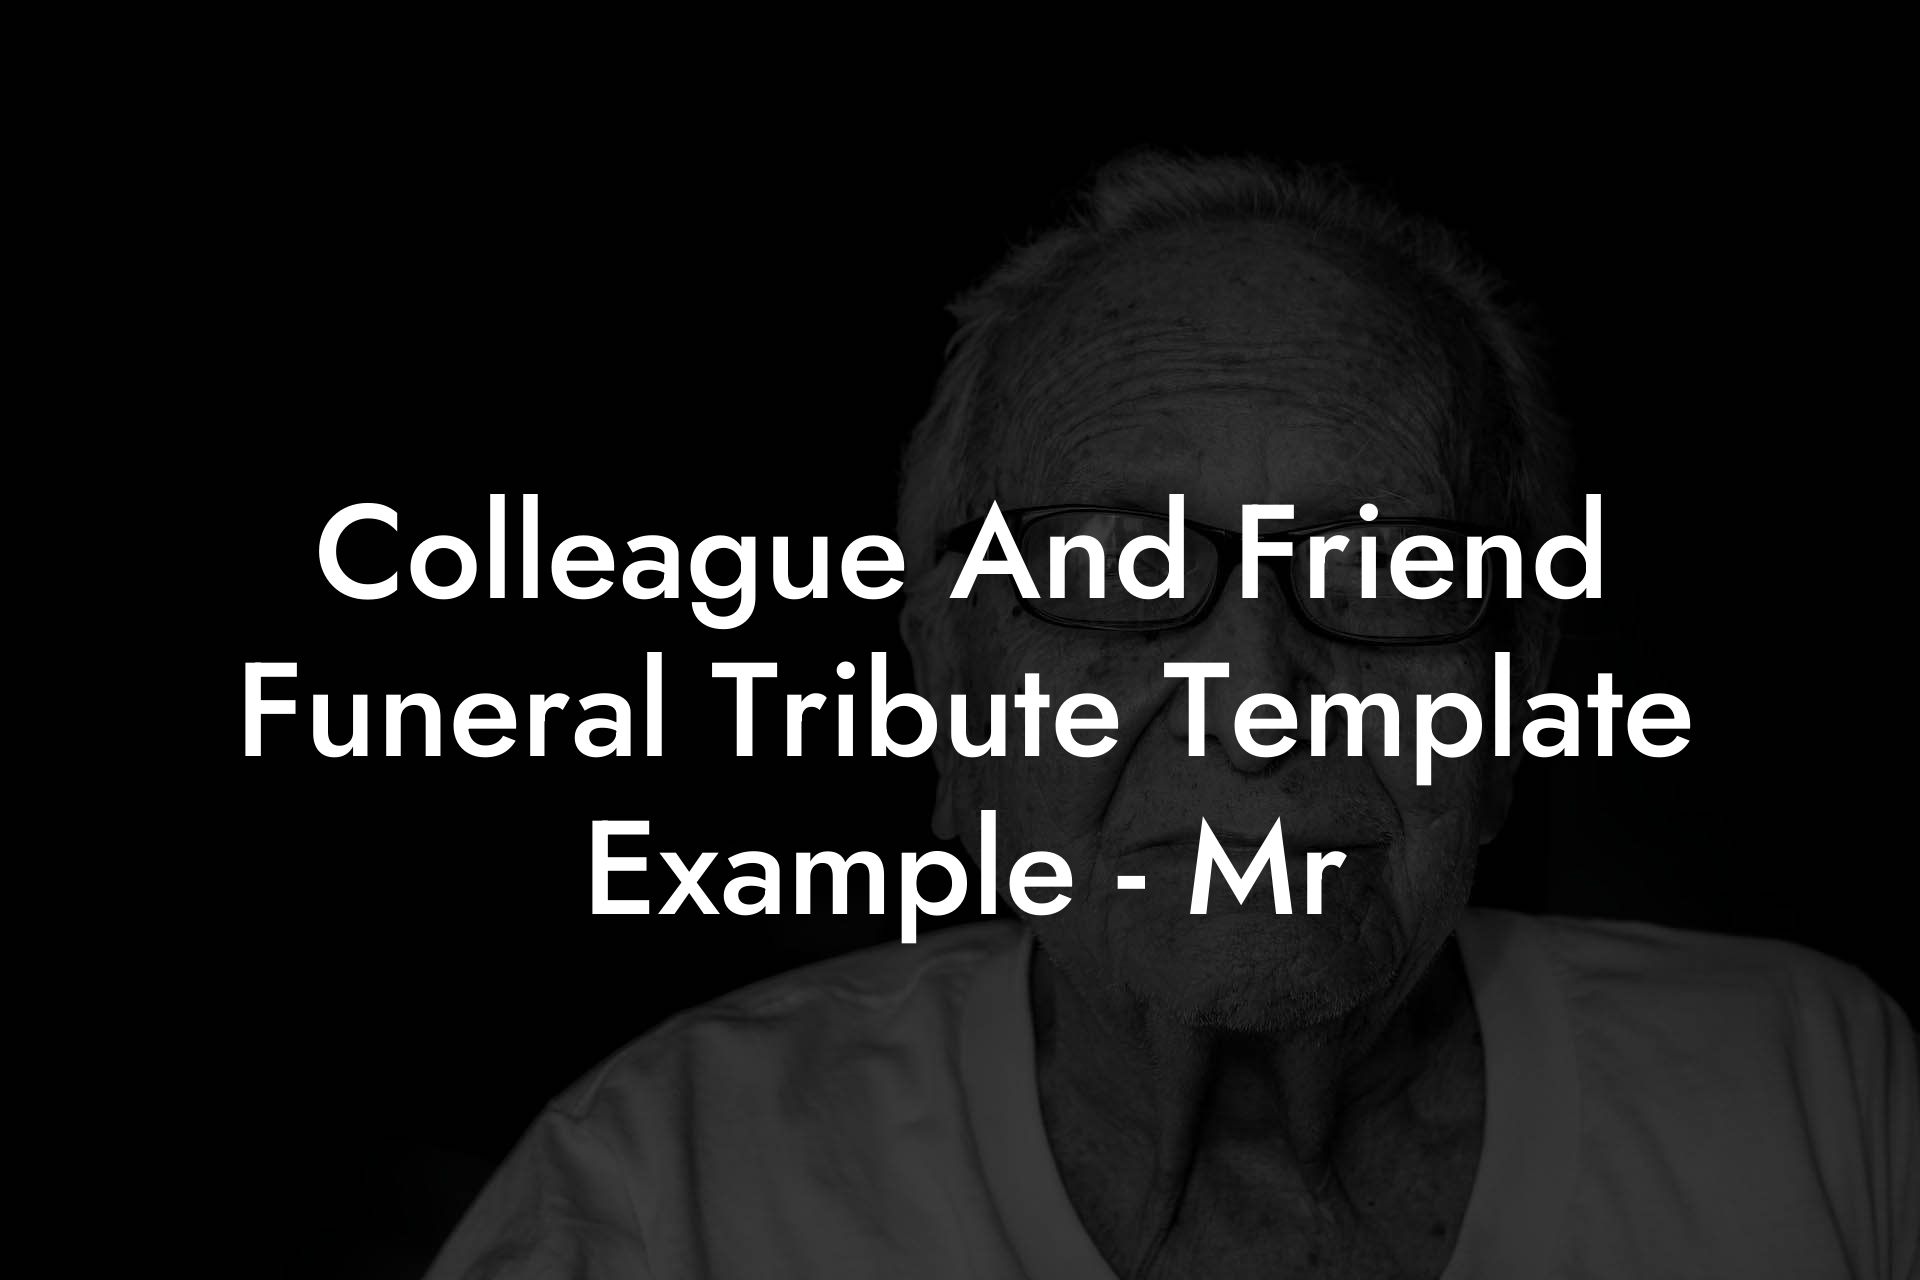 Colleague And Friend Funeral Tribute Template Example - Mr